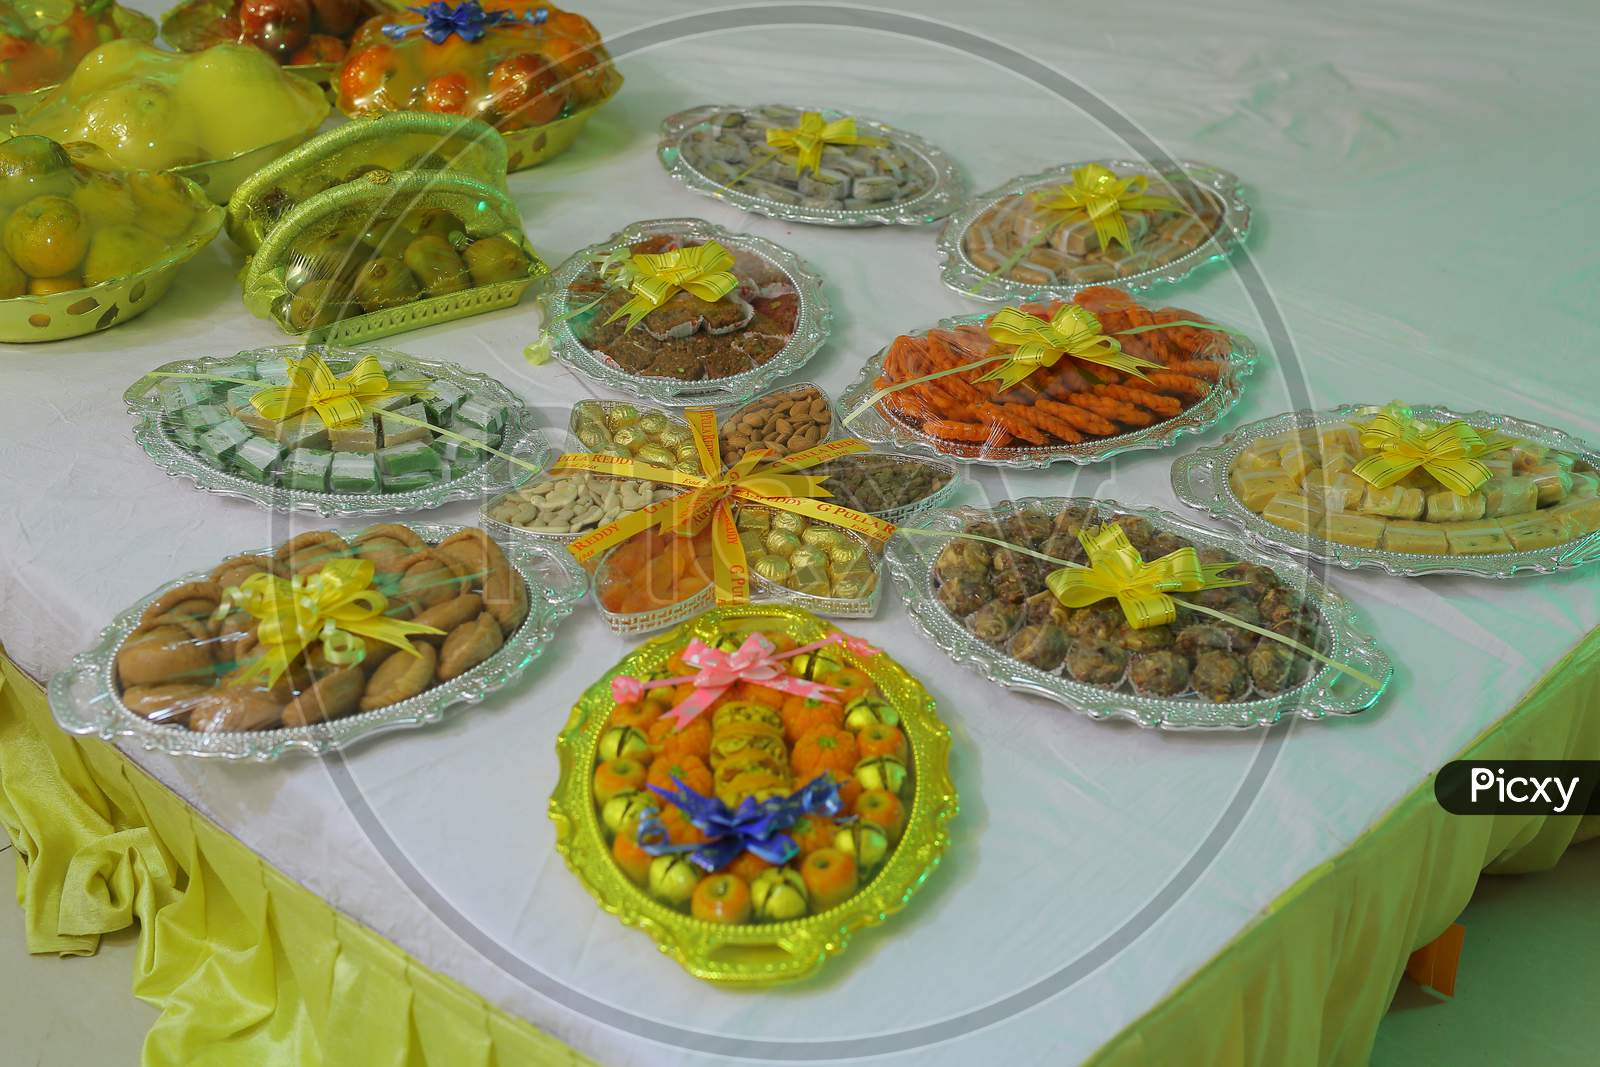 View of Sweets and Fruits during wedding ceremony